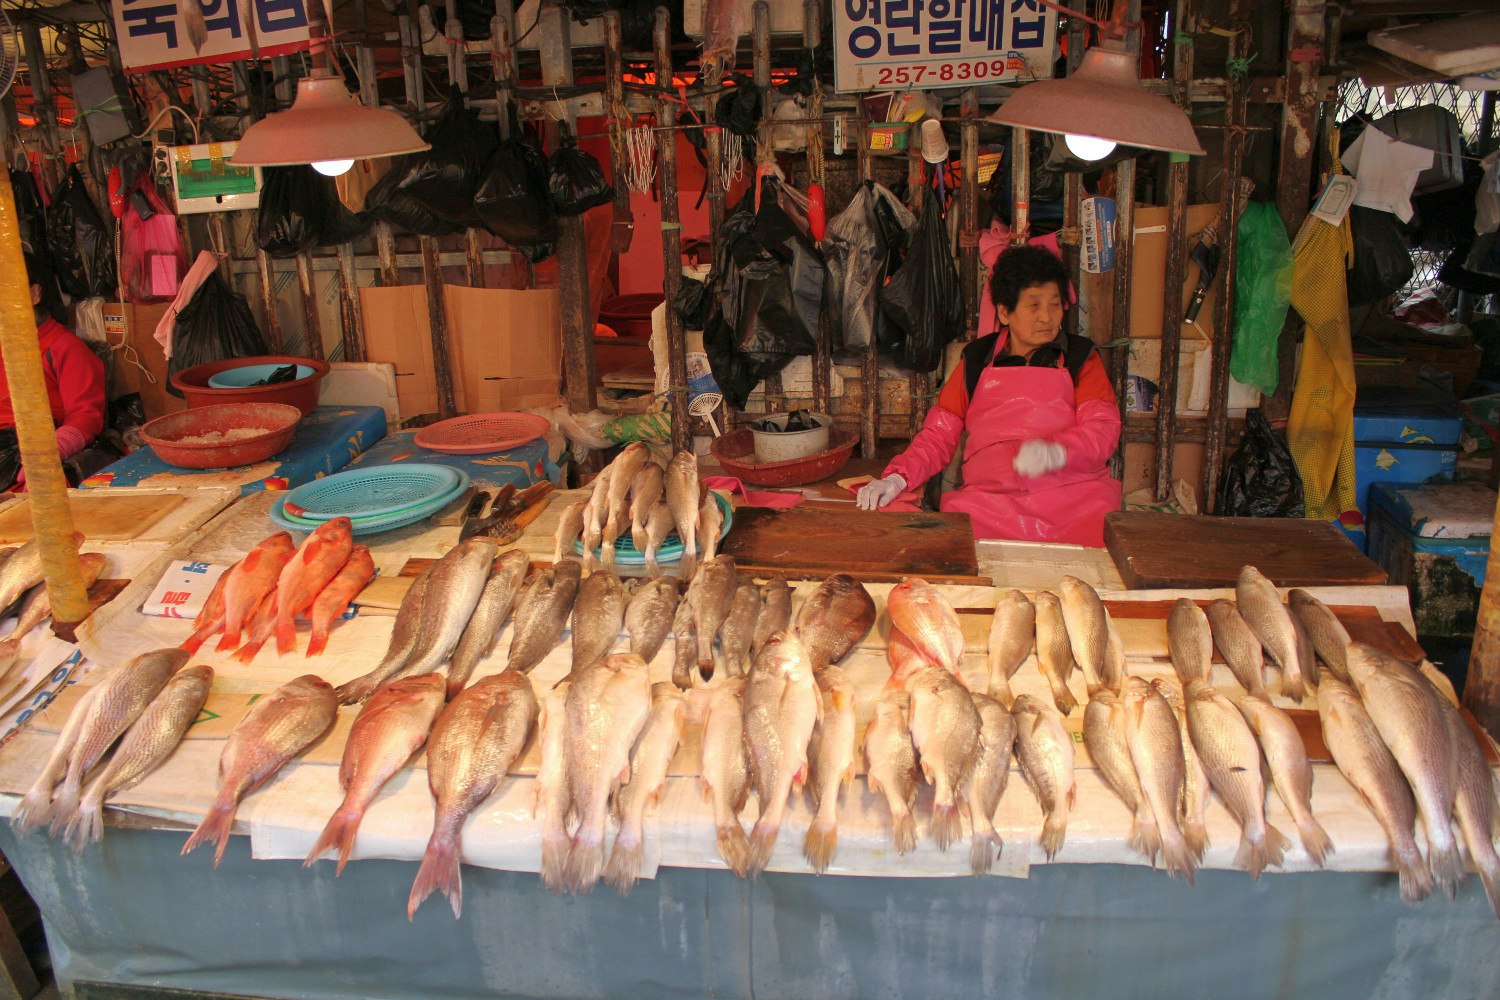 An array of seafood for sale at Jagalchi Fish Market. Image by Rob Whyte / Lonely Planet